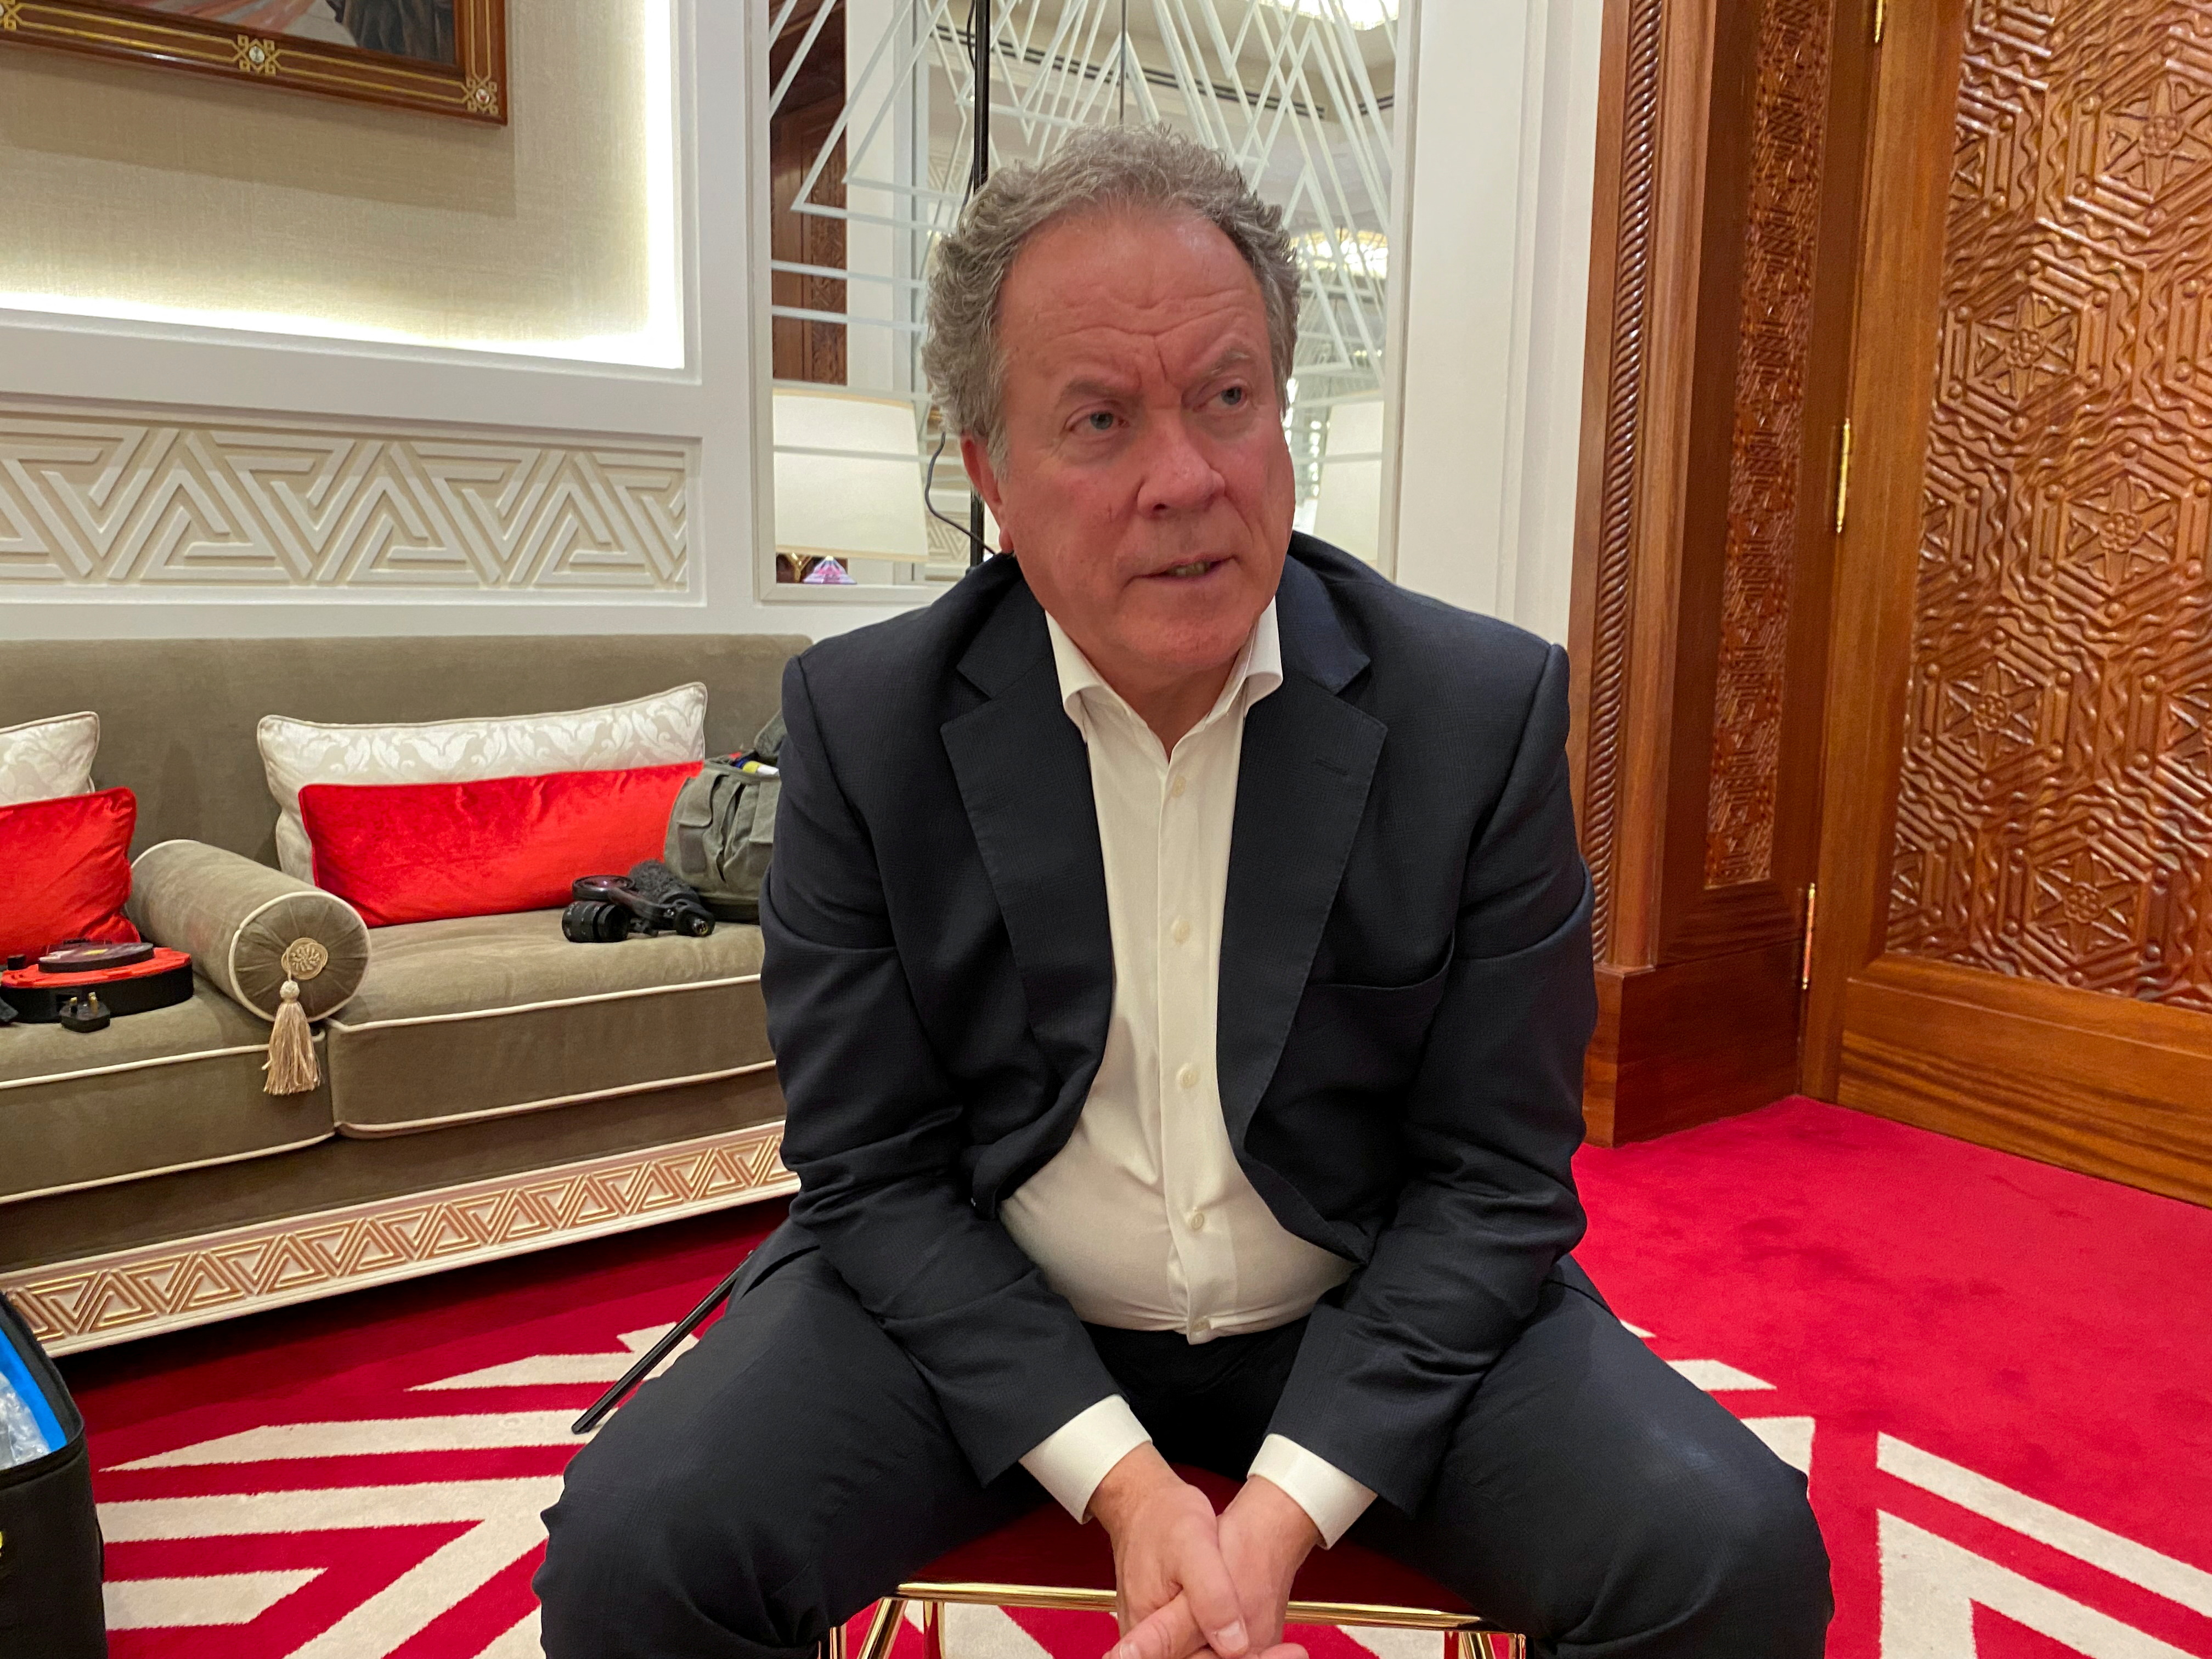 World Food Programme Executive Director David Beasley speaks during an interview with Reuters in Doha